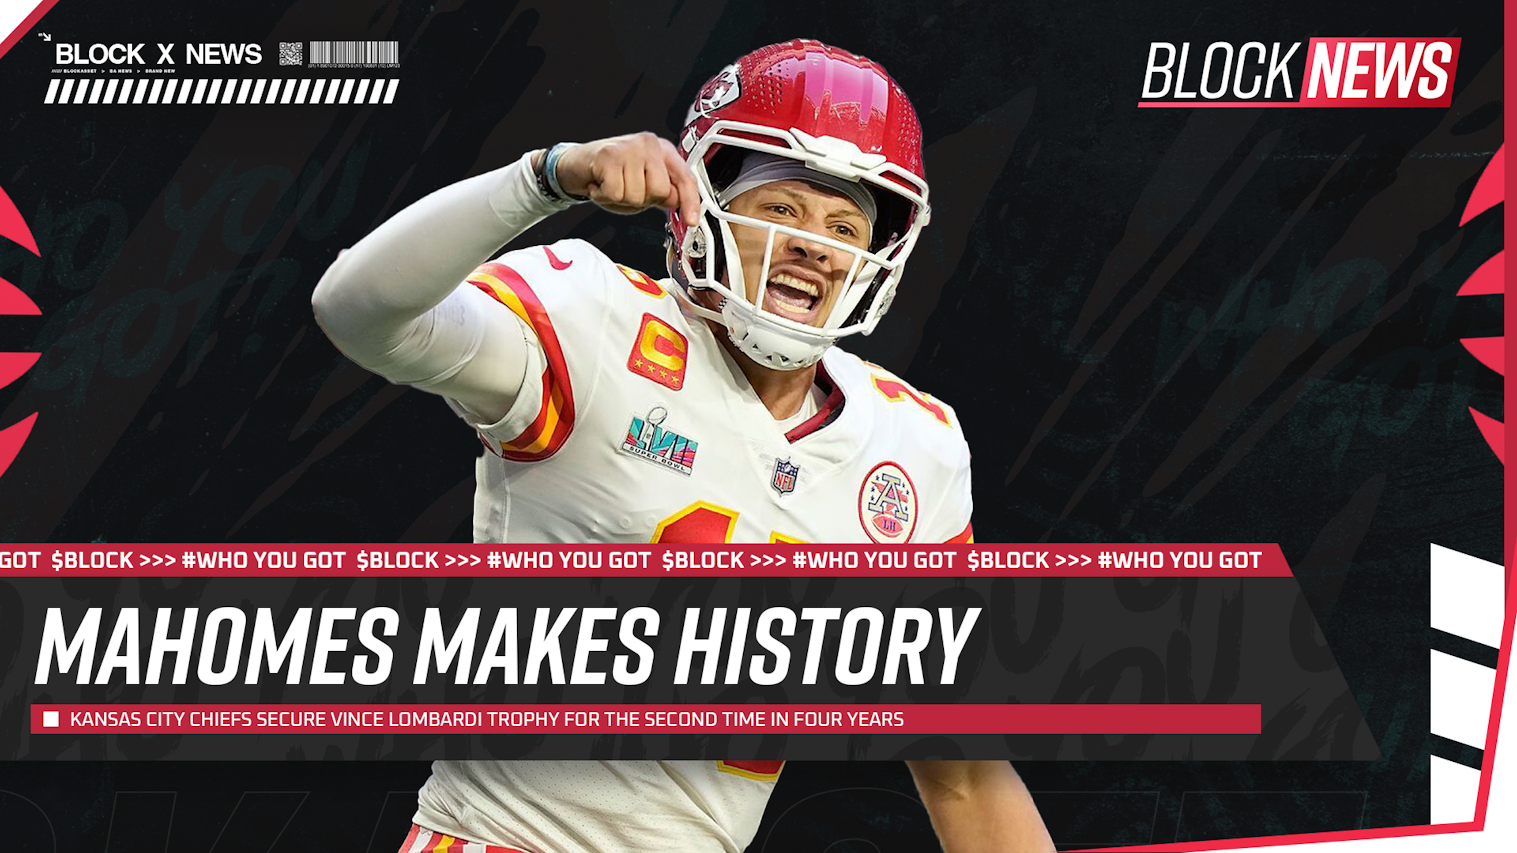 Patrick Mahomes underlines his credentials as one of the NFL's greatest quarterbacks